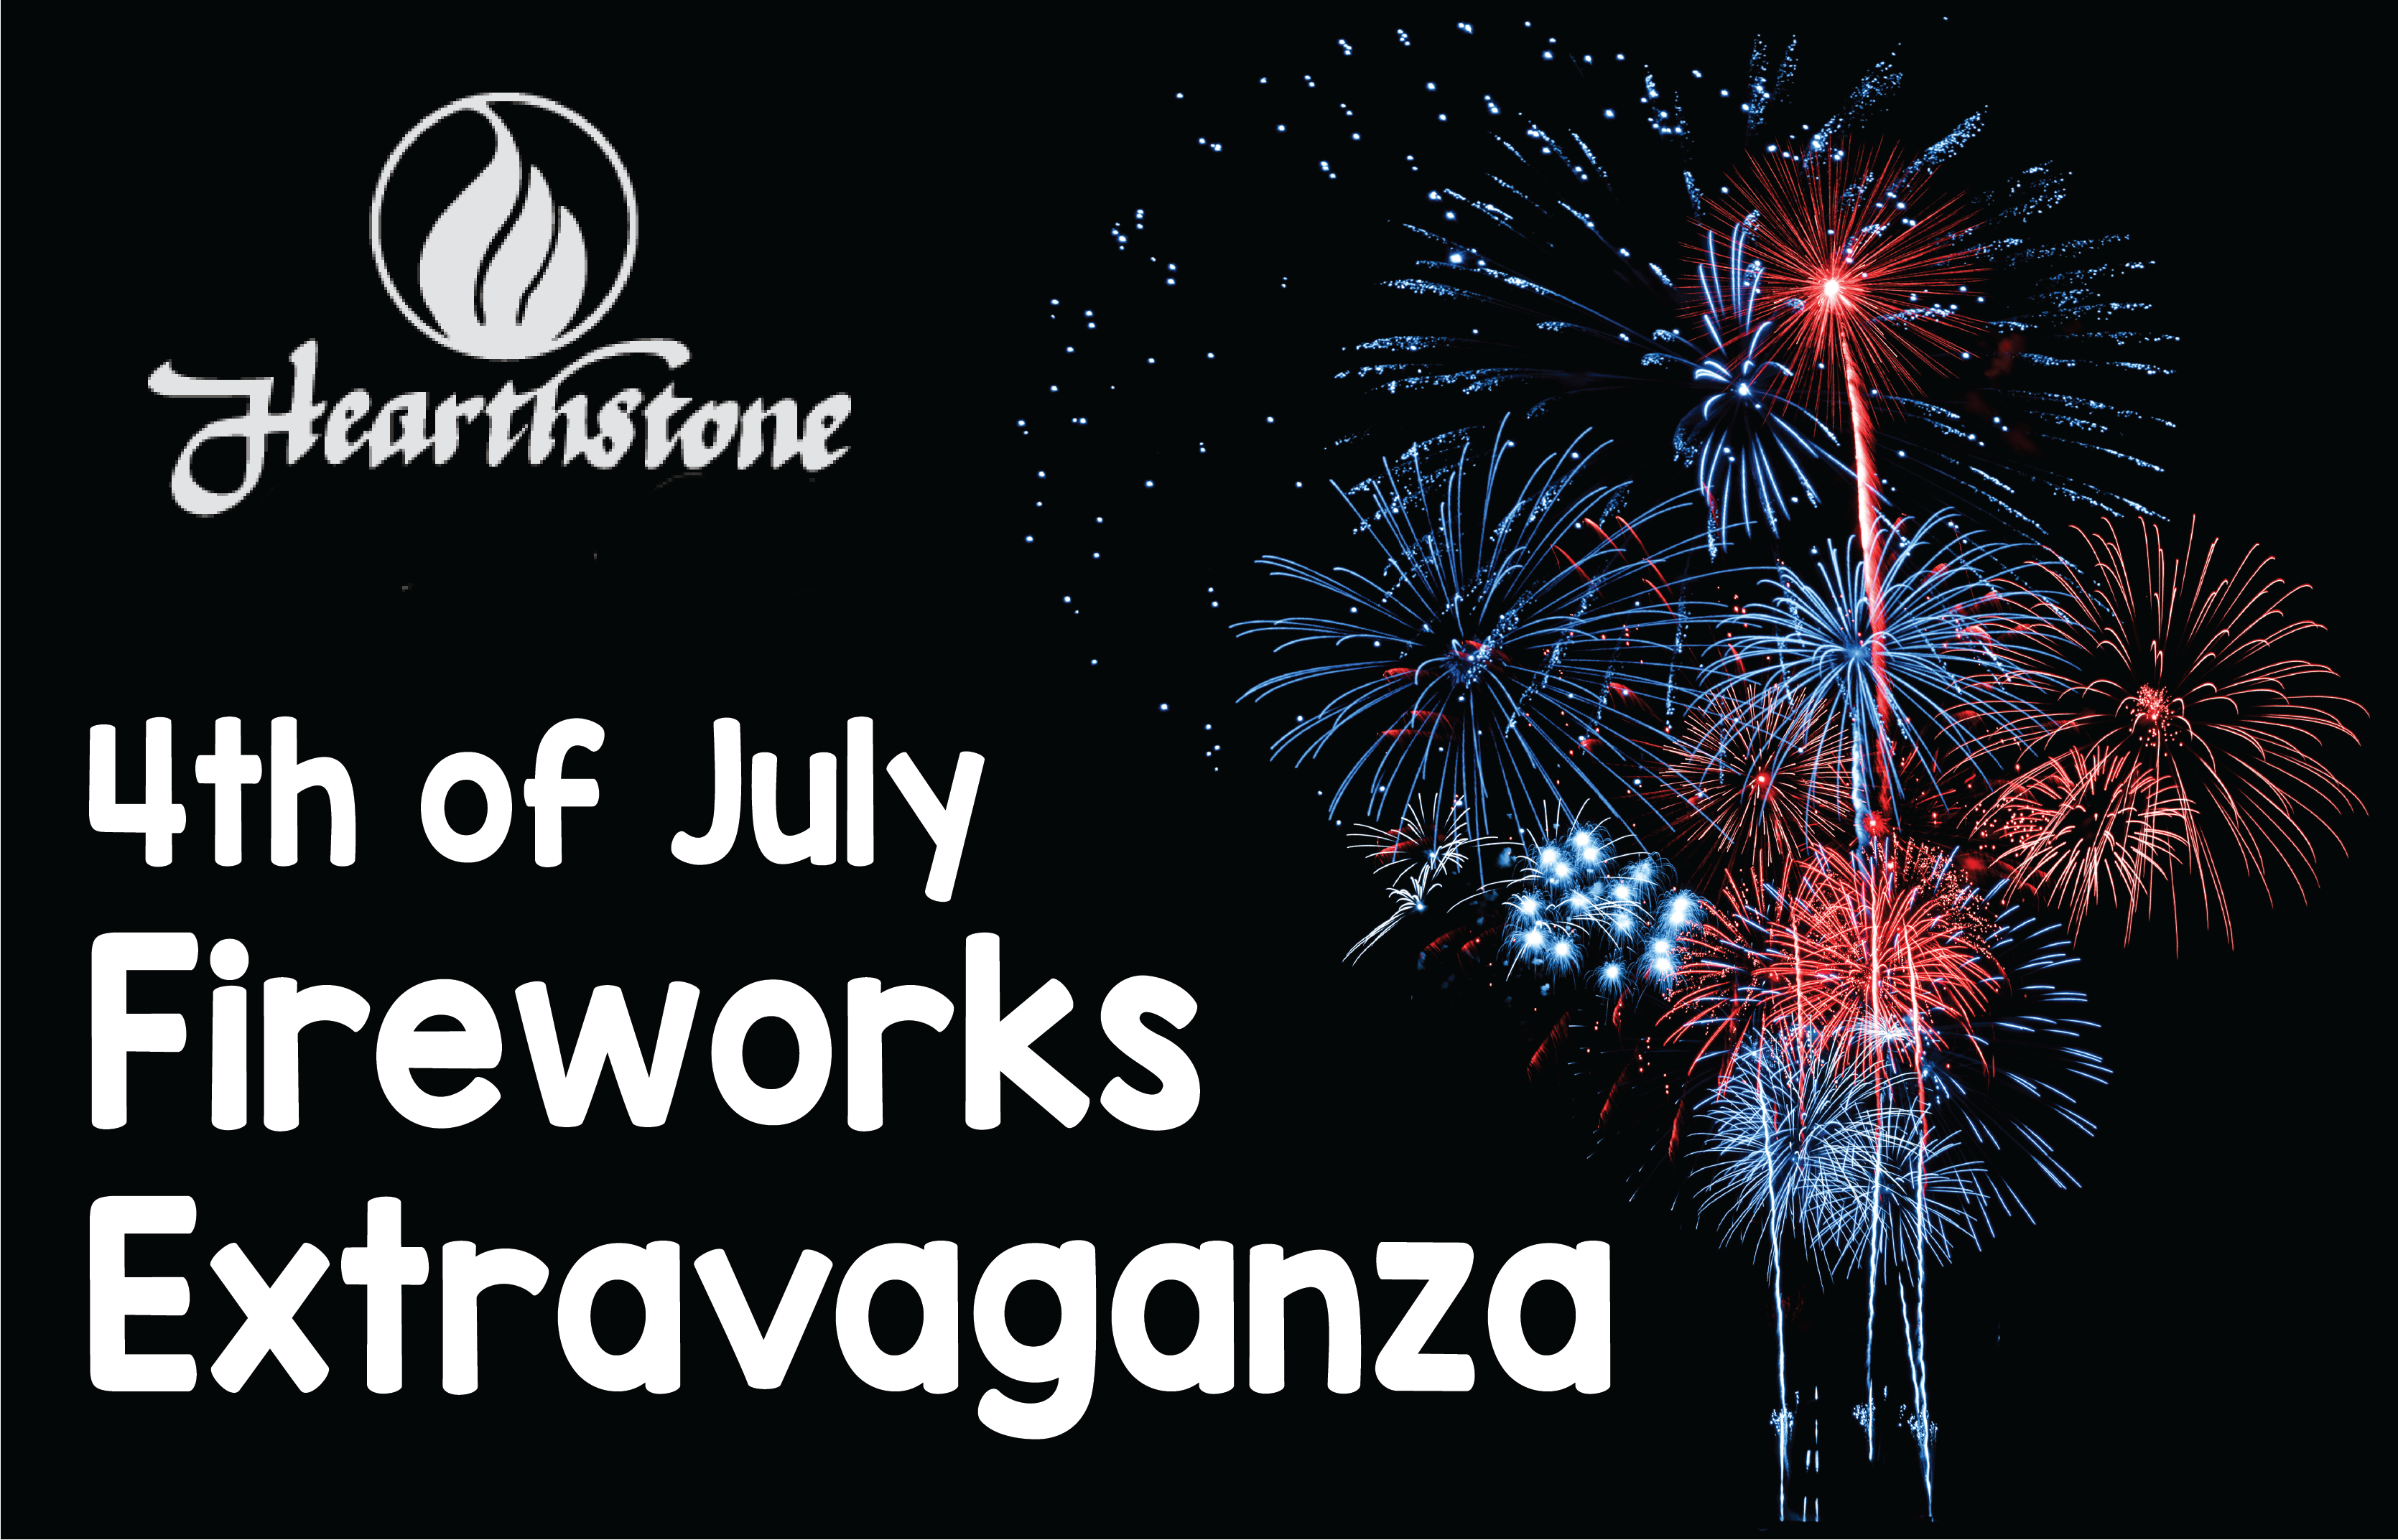 REMINDER:Get Ready to Light Up the Sky at the Hearthstone 4th of July Fireworks Extravaganza